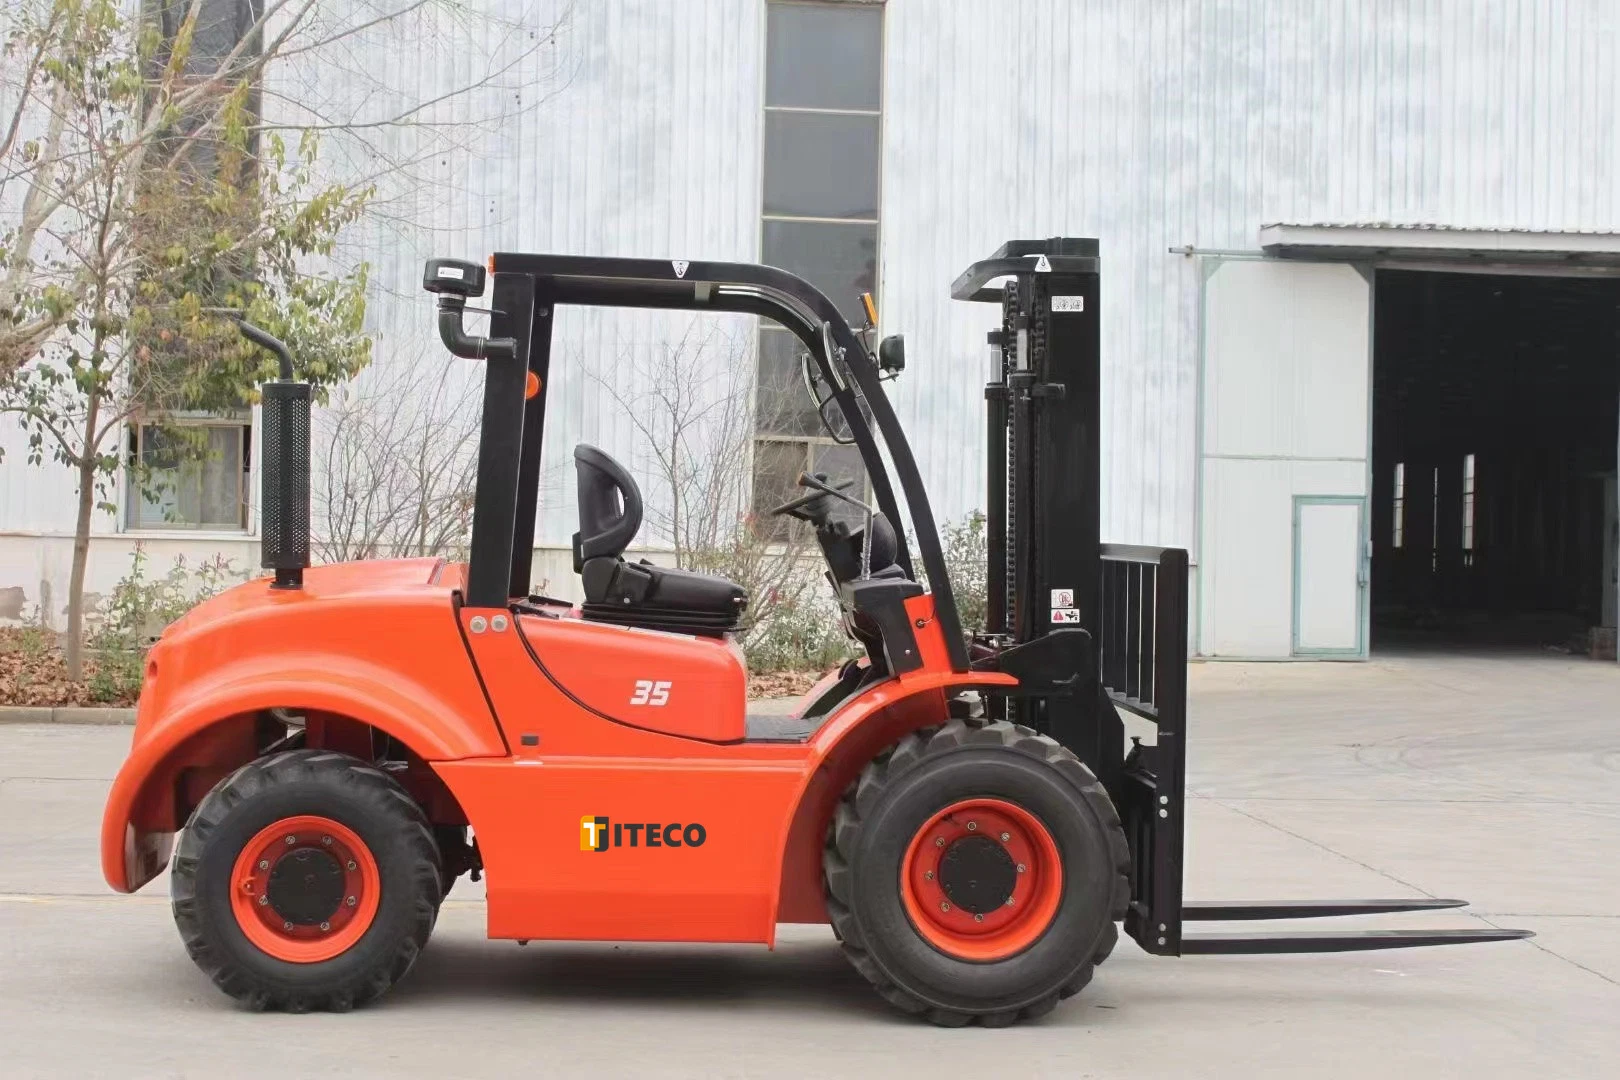 Diesel Counterbalanced Forklift Truck Used Forklift Trucks in Stock Diesel Forklift Rough Terrain Forklift Mini Forklift Lithium Battery Electric Forklift